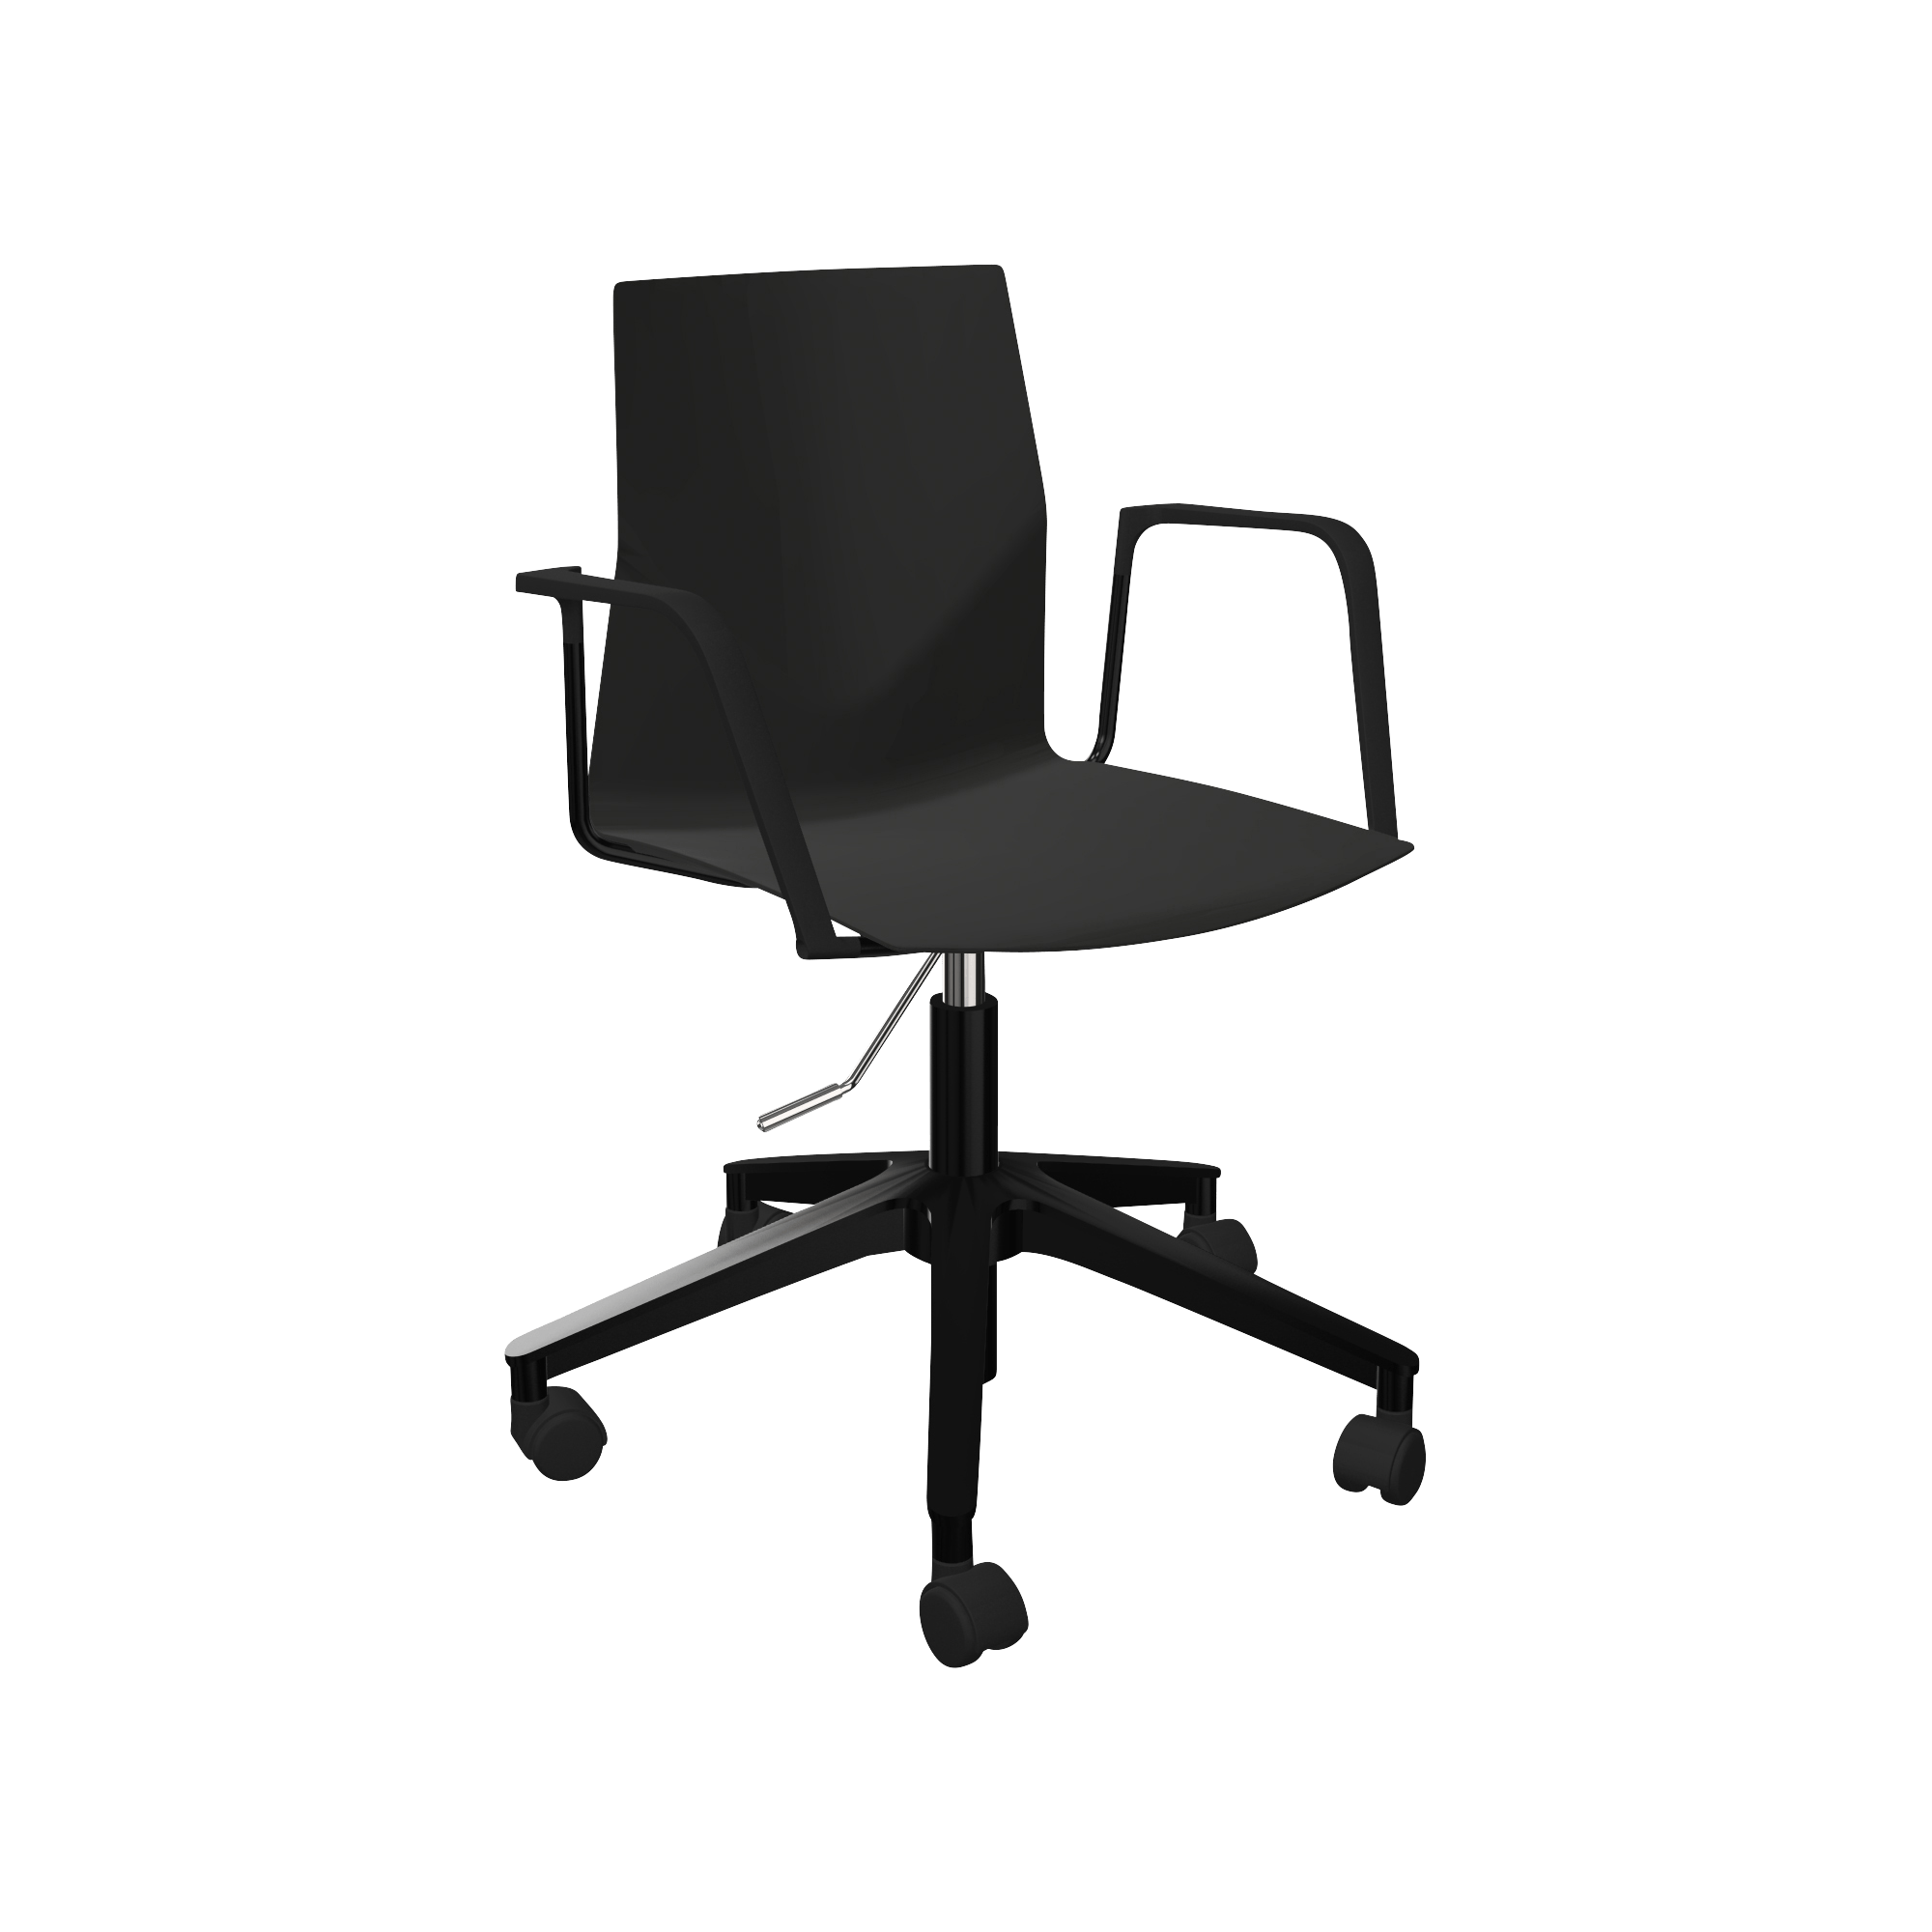 A black office chair with castors